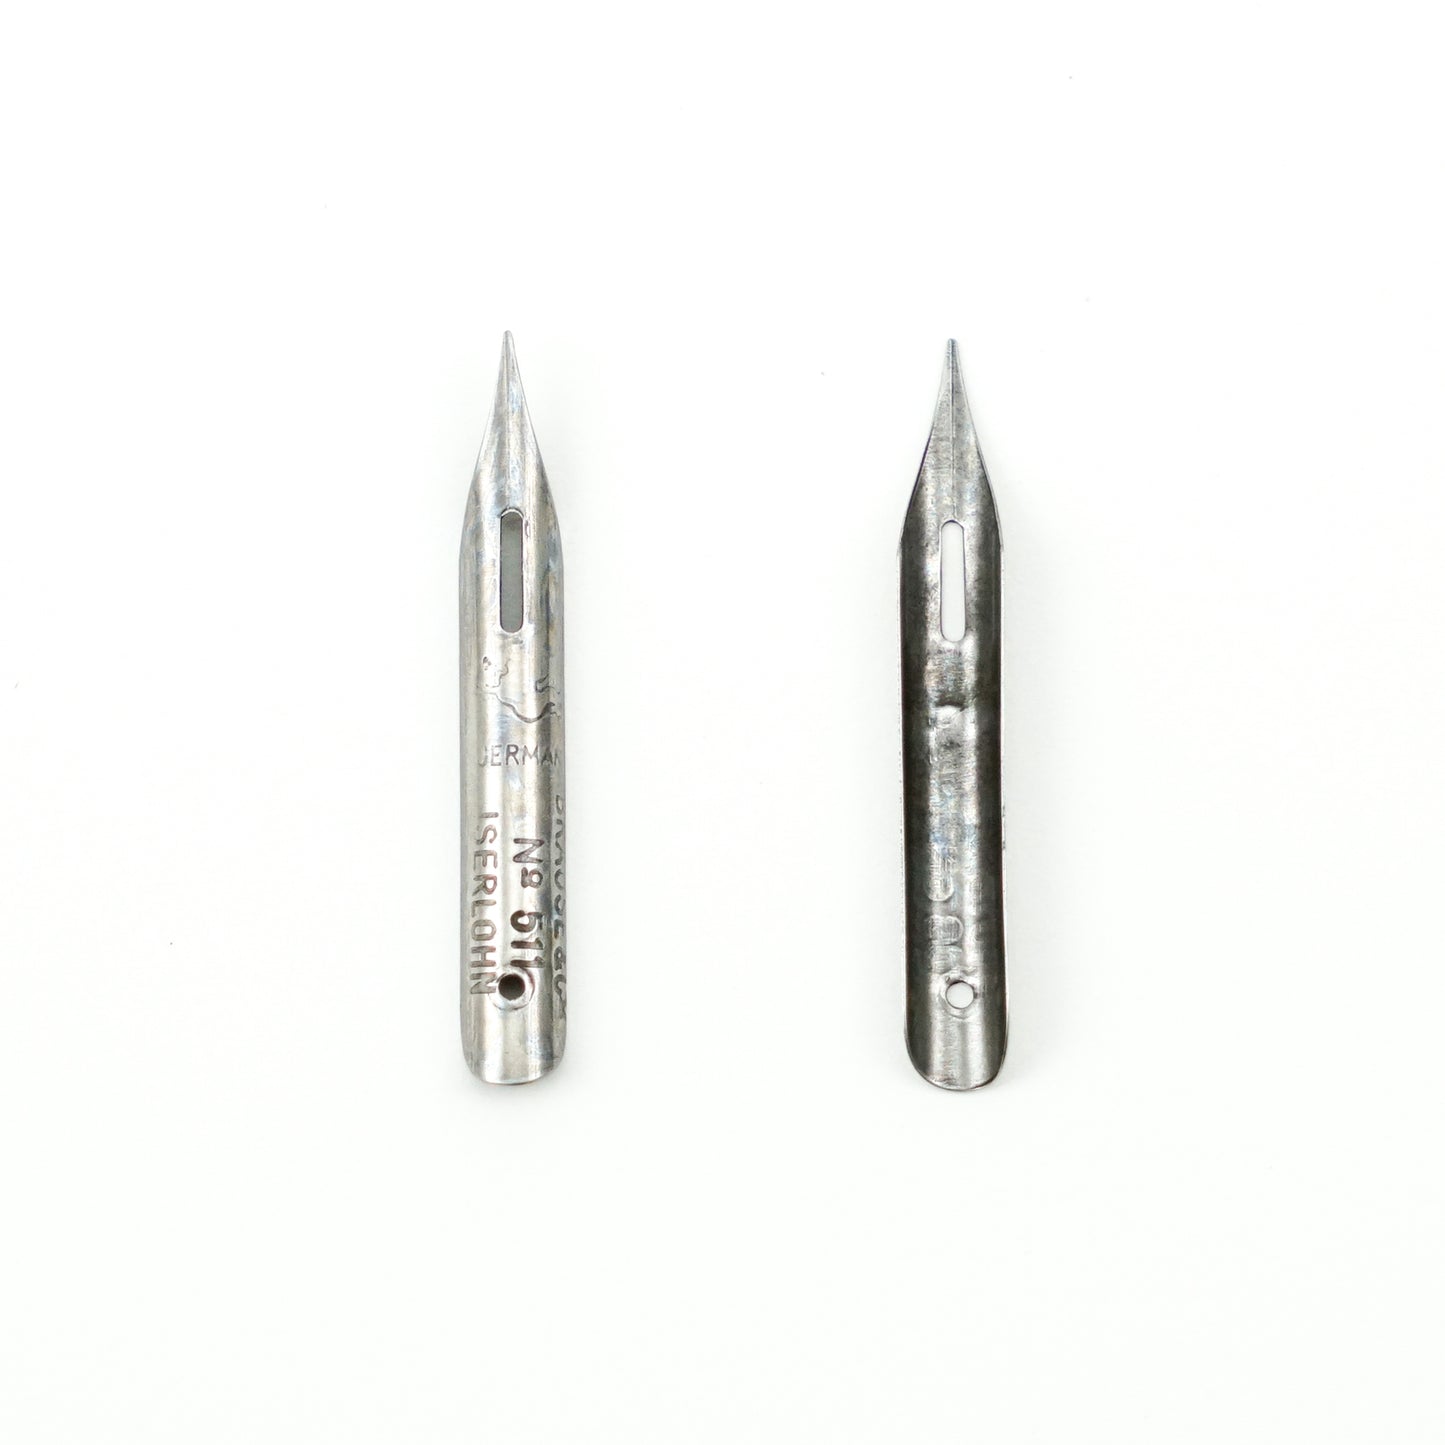 Brause 511 Drawing and Calligraphy Nibs - 2/pack - by Brause - K. A. Artist Shop